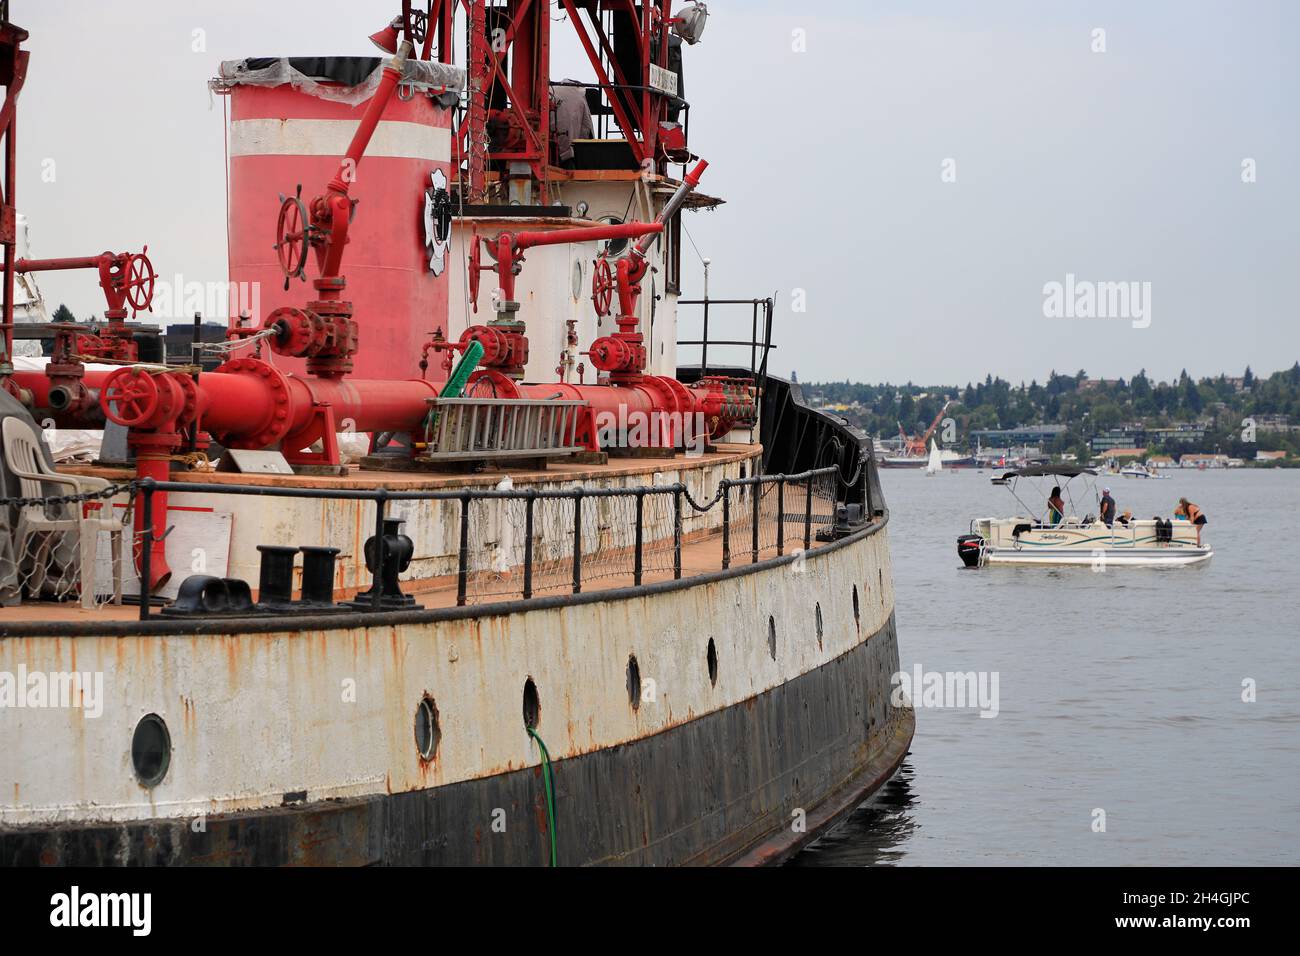 The retired fireboat Duwamish docking at historic ships wharf of Museum of History and Industry in Lake Union Park.Seattle.Washington.USA Stock Photo